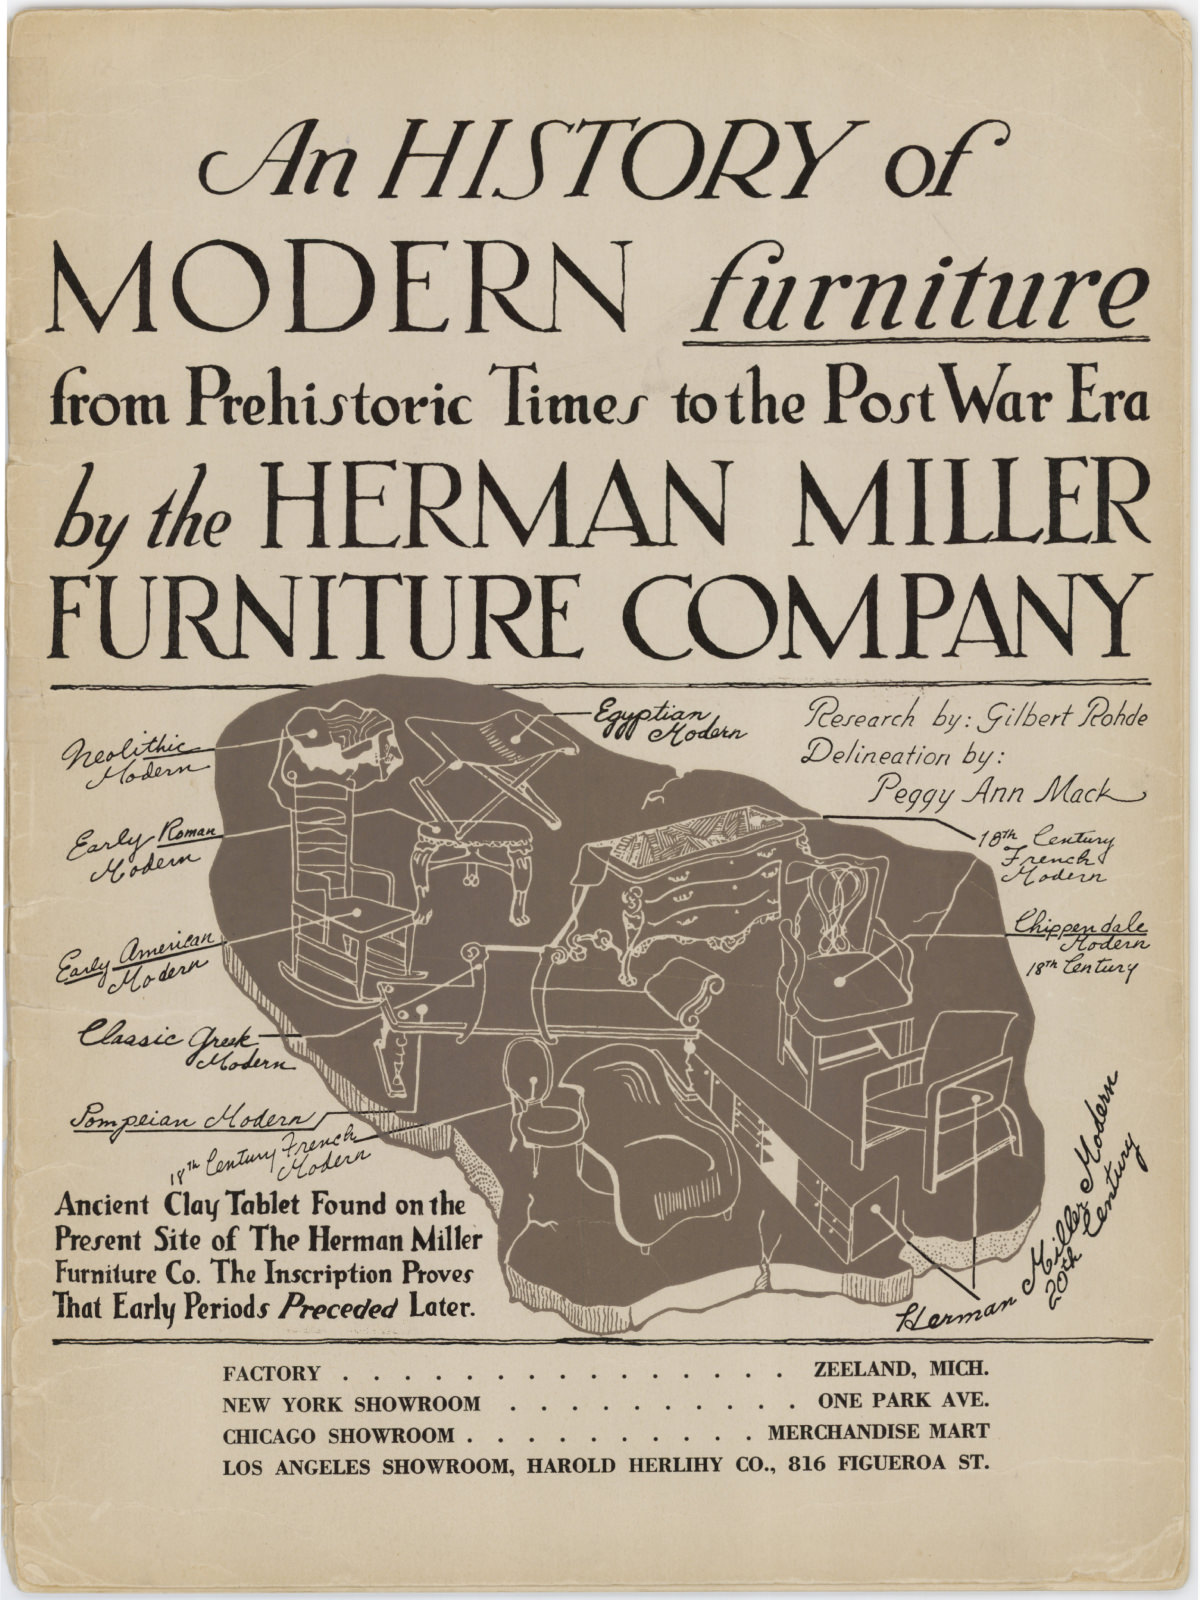 Herman Miller promotional booklet featuring black and white illustrations of antique reproduction furniture alongside modern furniture. Text advocates for modern design.